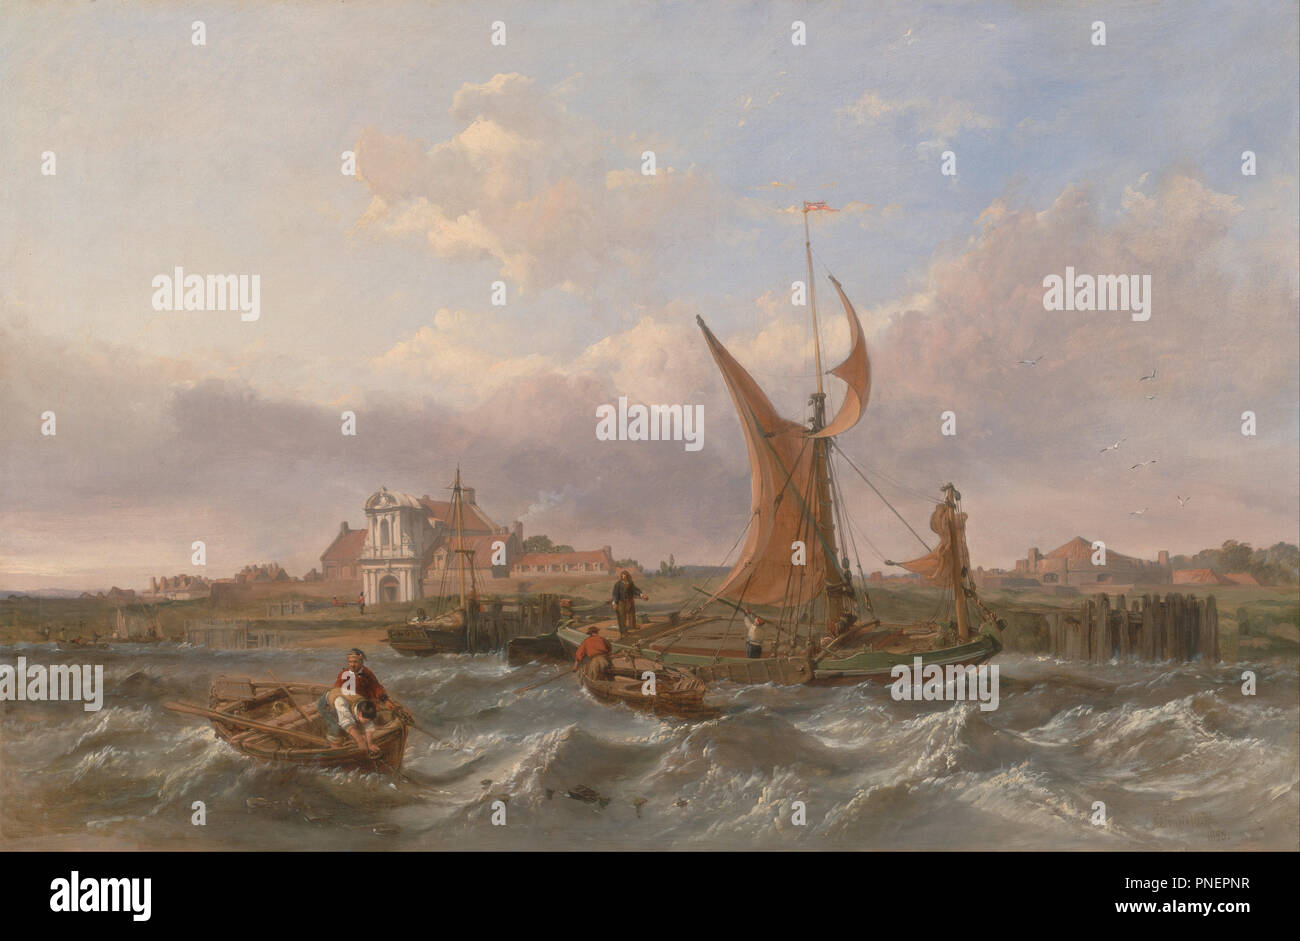 Tilbury Fort--Wind Against the Tide. Date/Period: 1853. Painting. Oil on canvas. Height: 610 mm (24.01 in); Width: 921 mm (36.25 in). Author: Clarkson Frederick Stanfield. Stock Photo